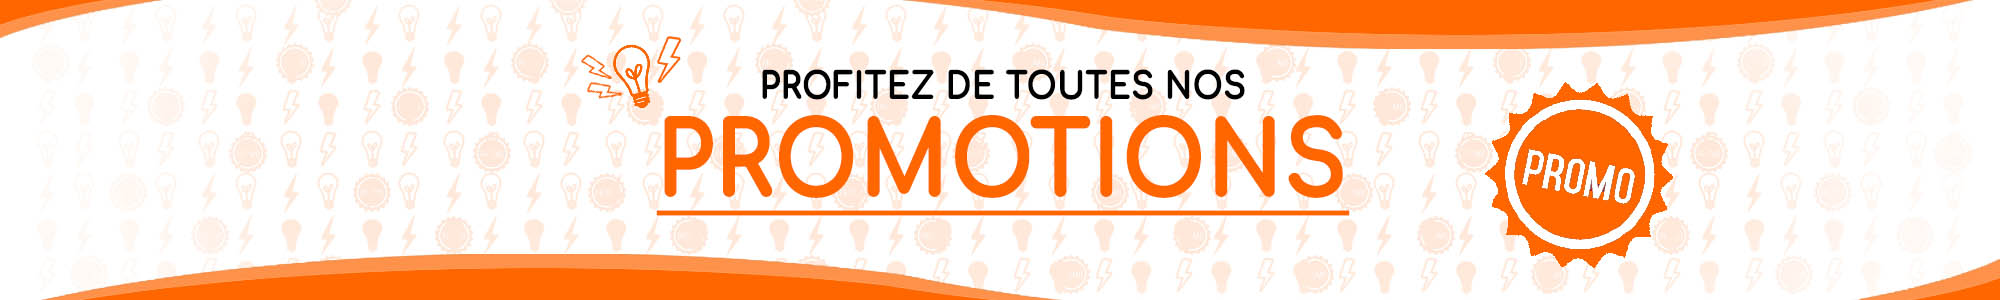 PROMOTIONS ECLAIRAGE